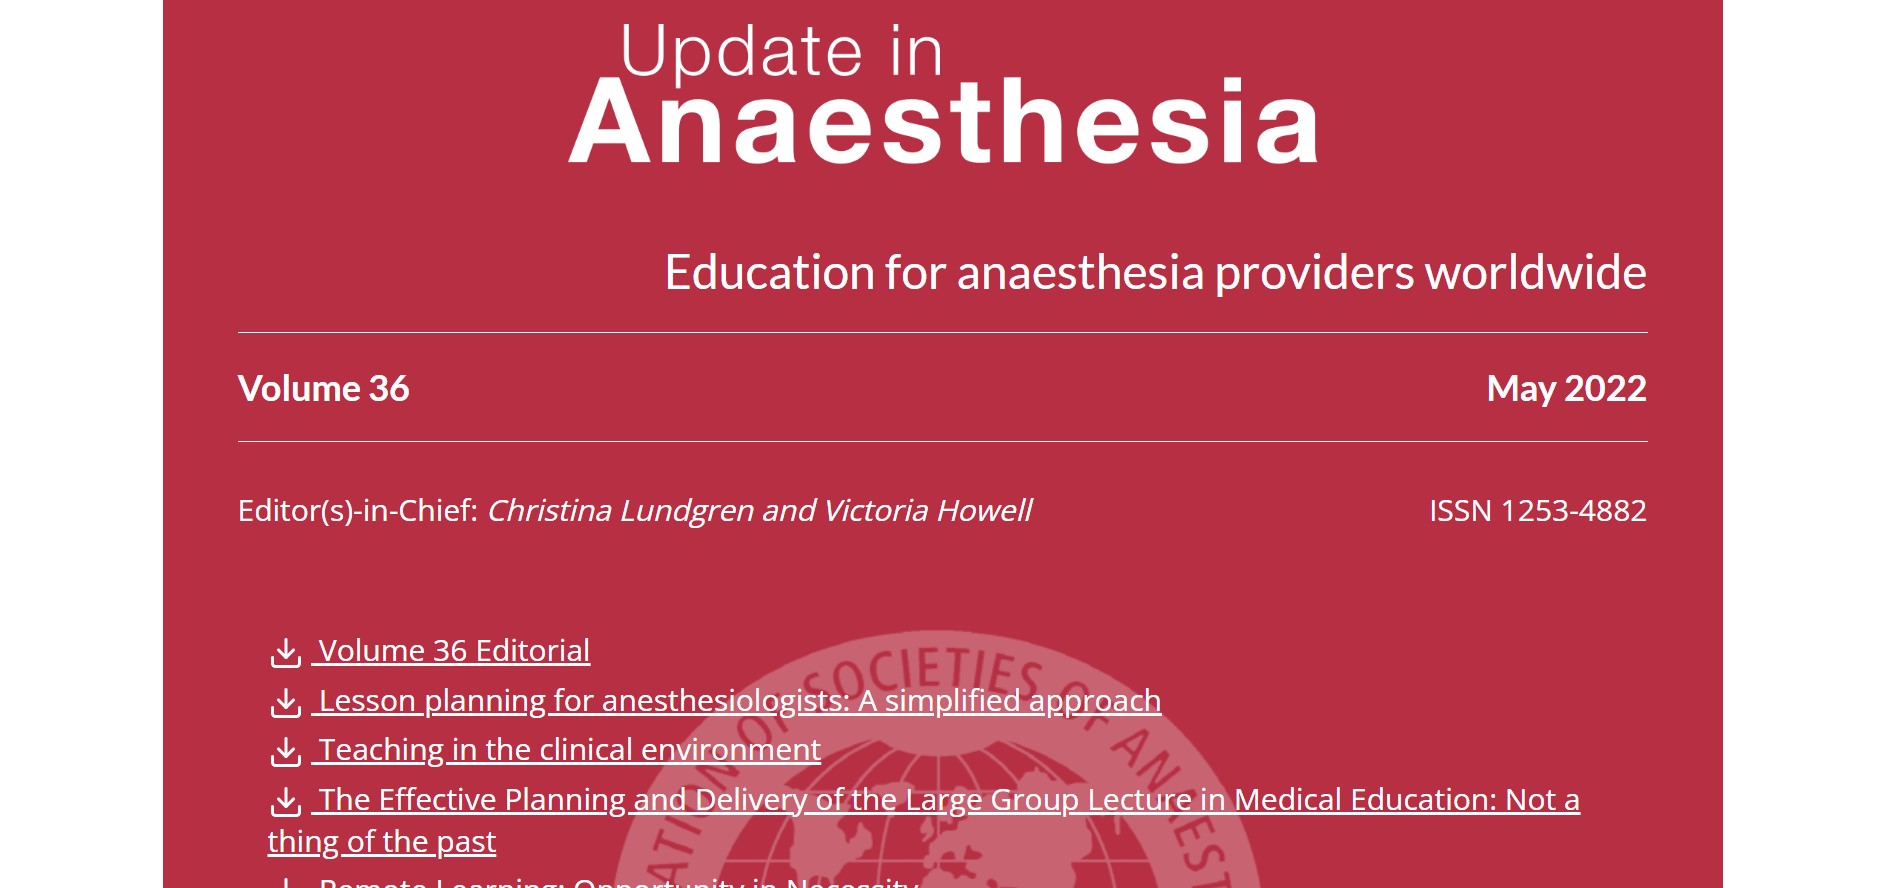 Update in Anaesthesia Volume 36: Special Edition Anaesthetic Education / COVID-19